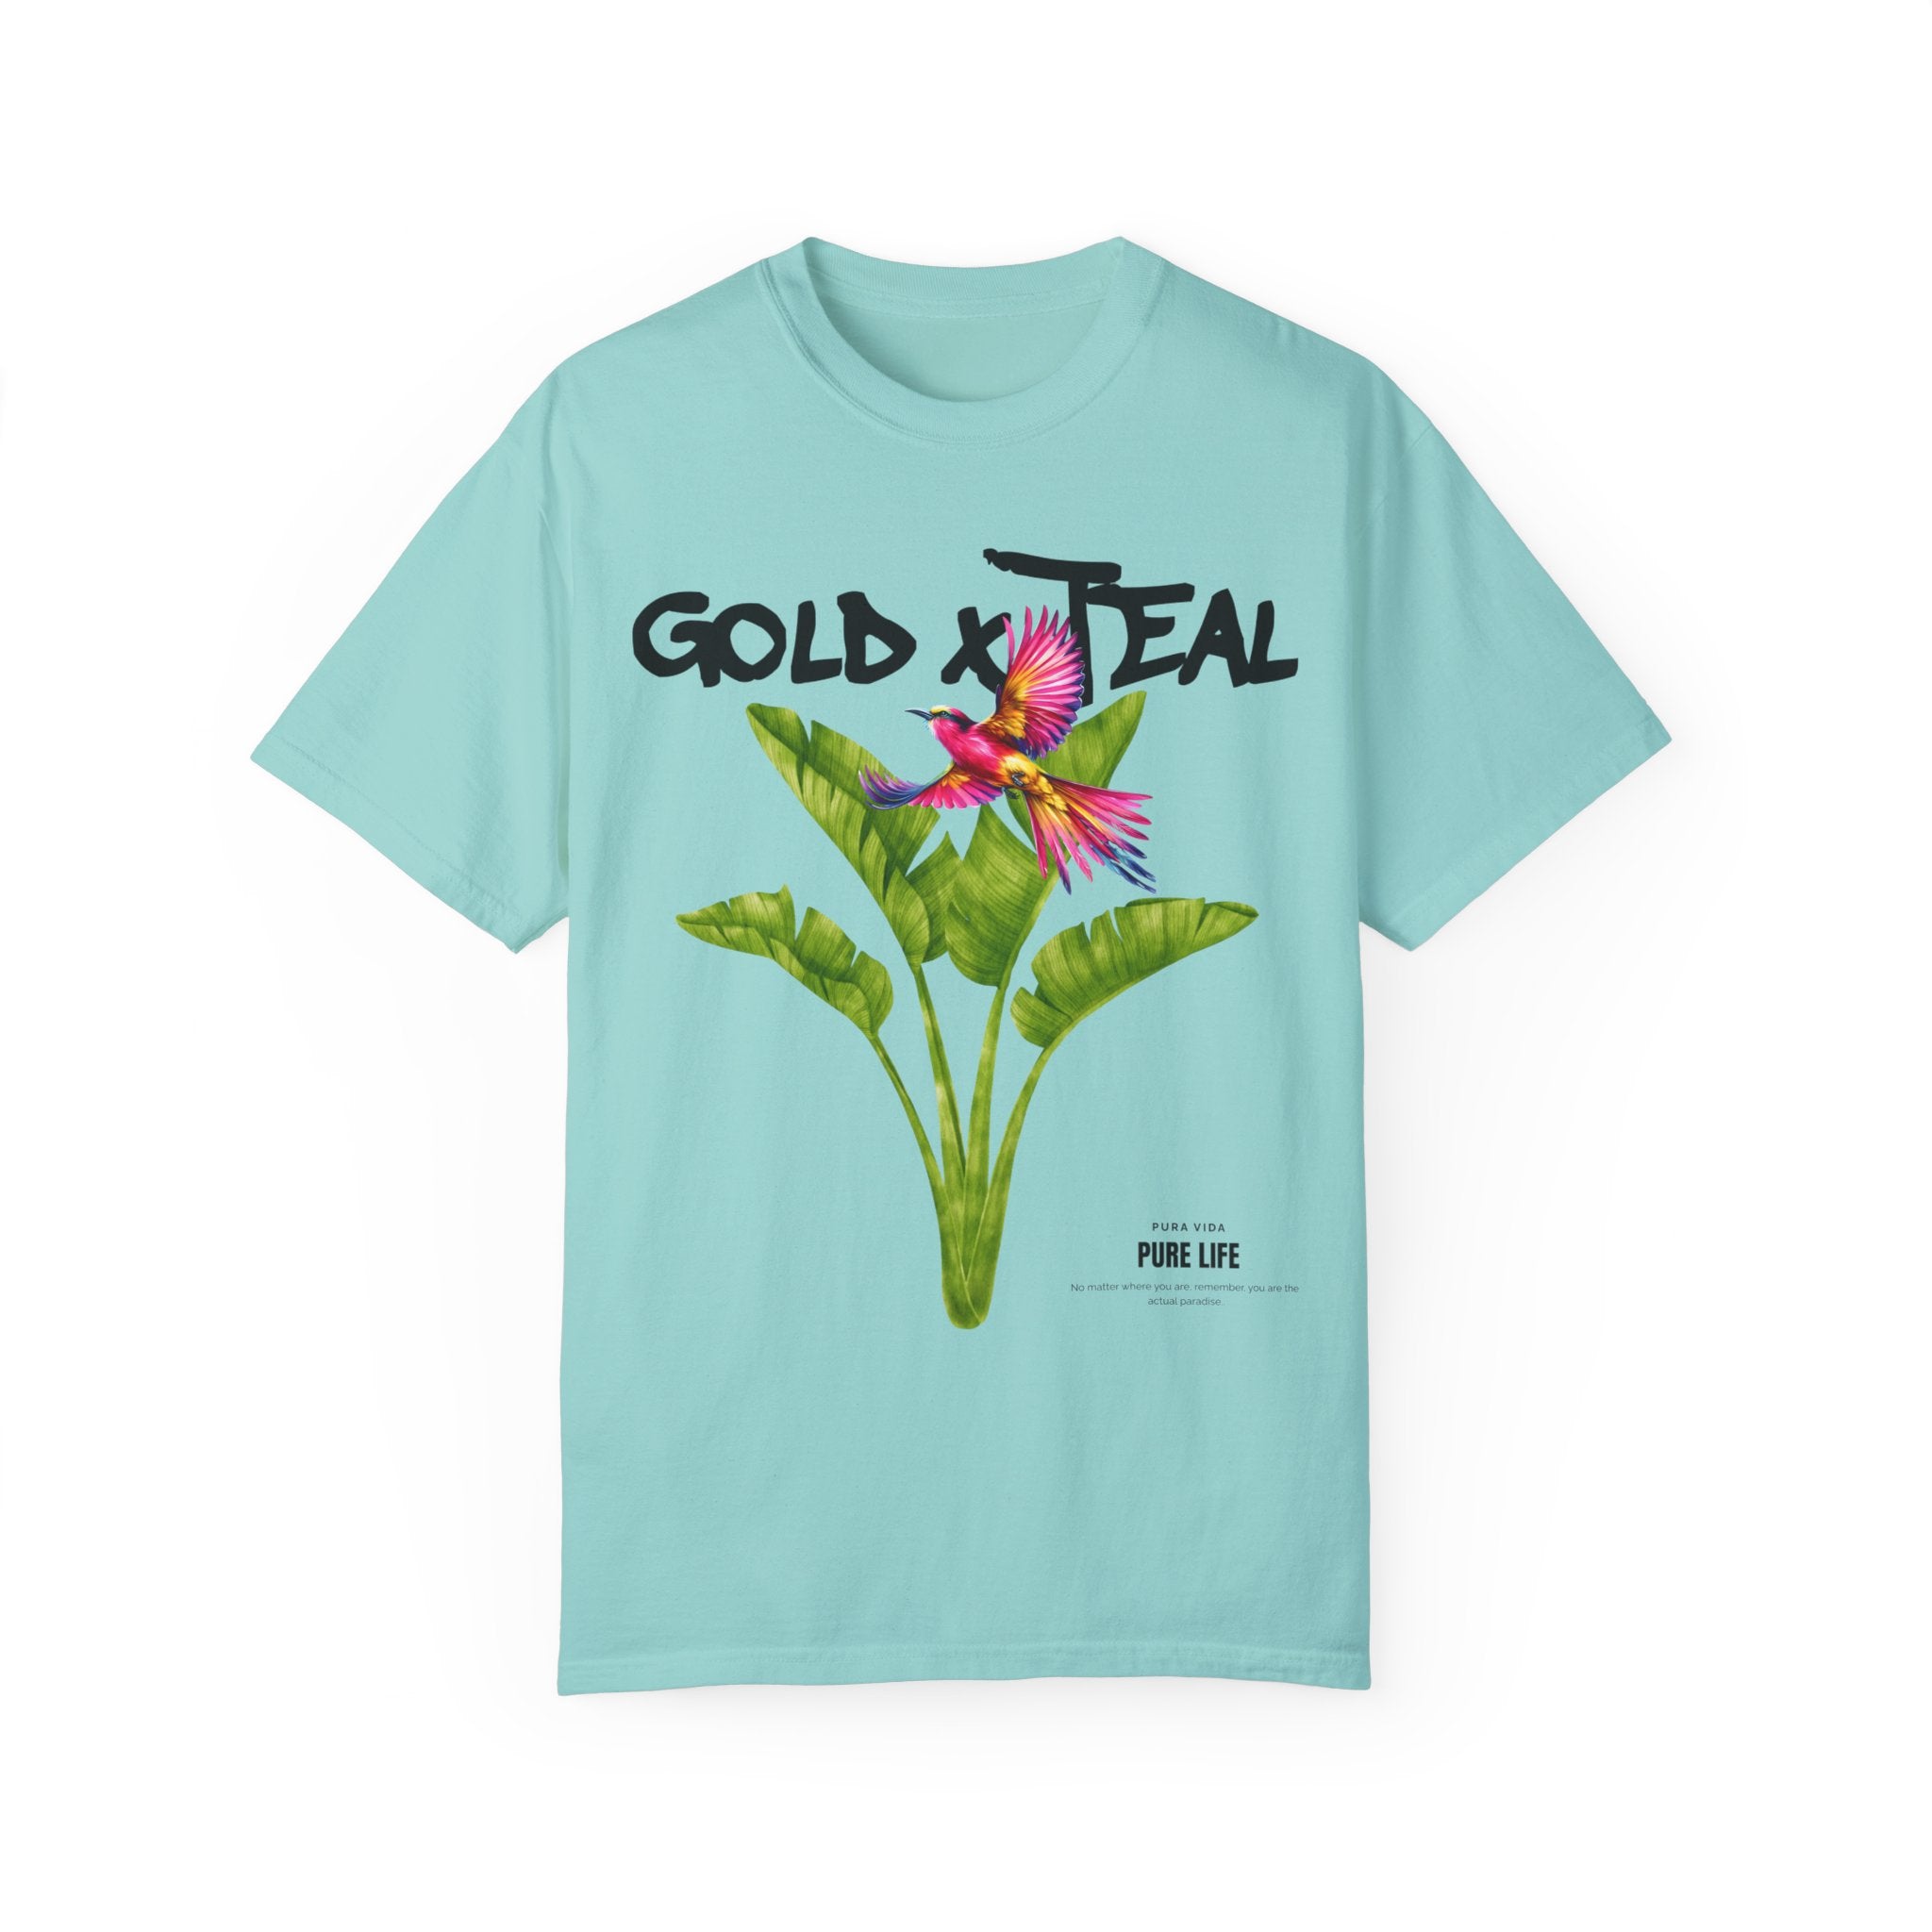 GOLDxTEAL colorful and bold tropical graphic t-shirt.